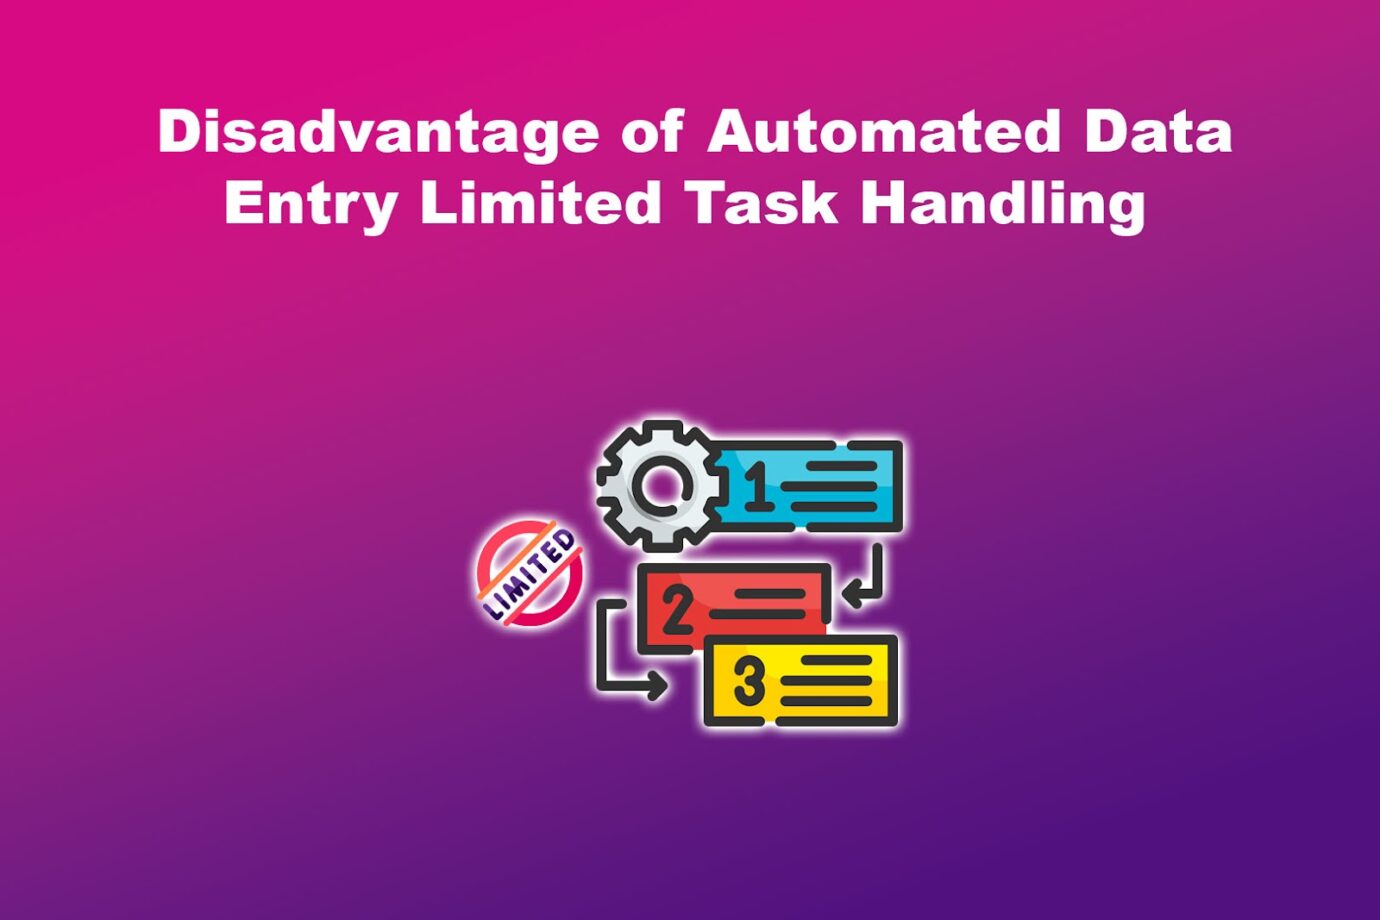 Disadvantage of Automated Data Entry Limited Task Handling